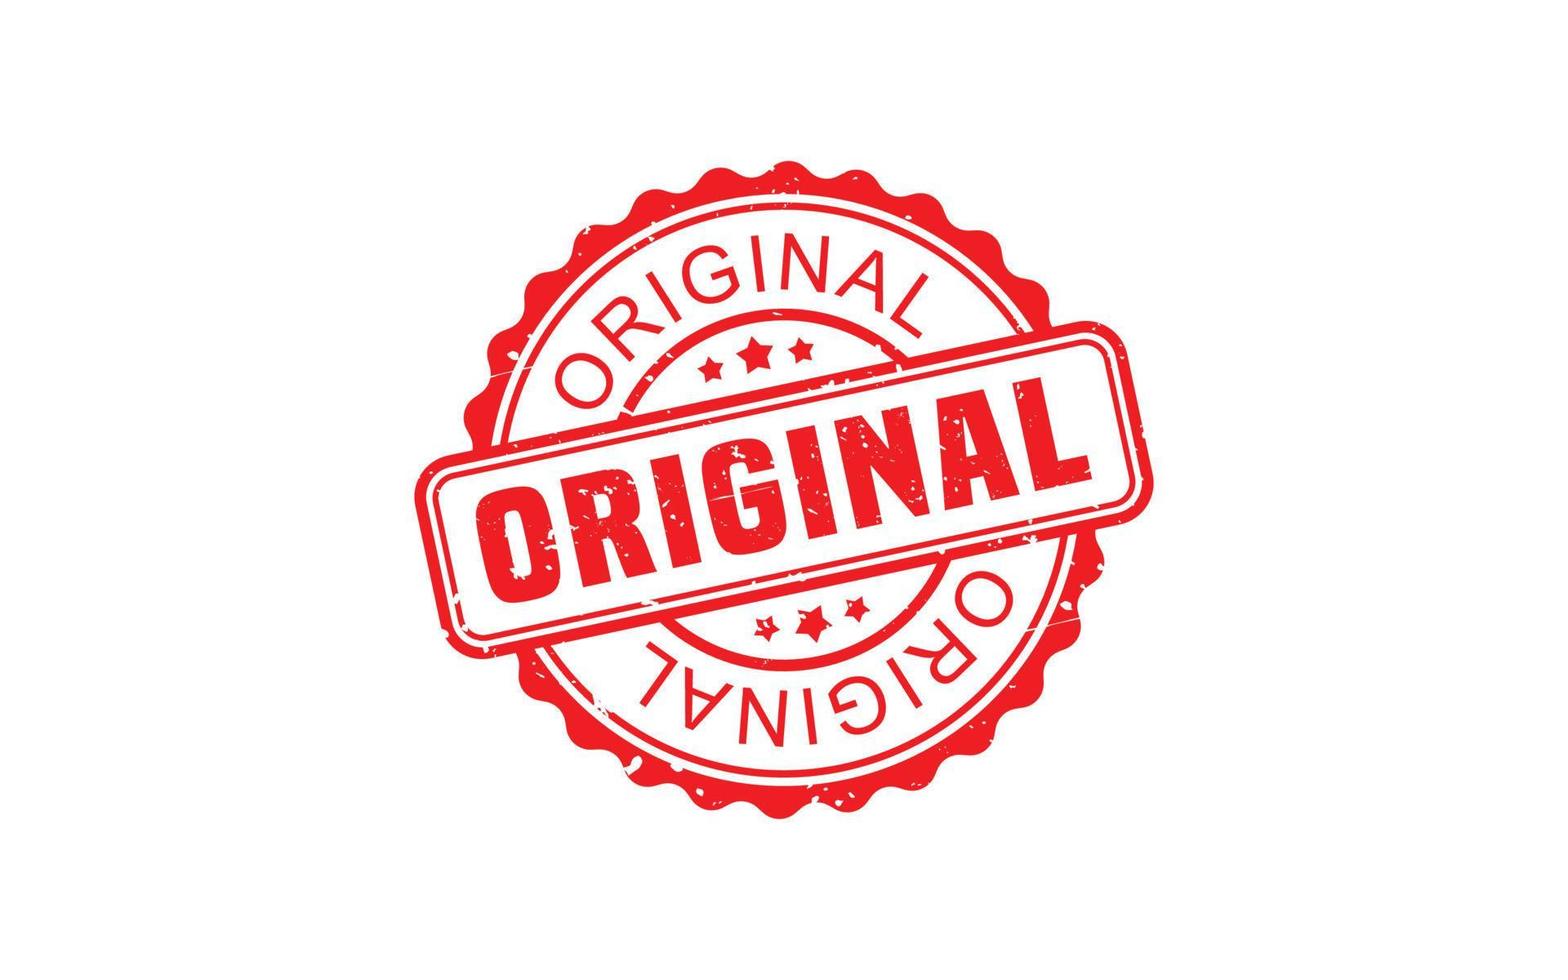 ORIGINAL rubber stamp with grunge style on white background vector